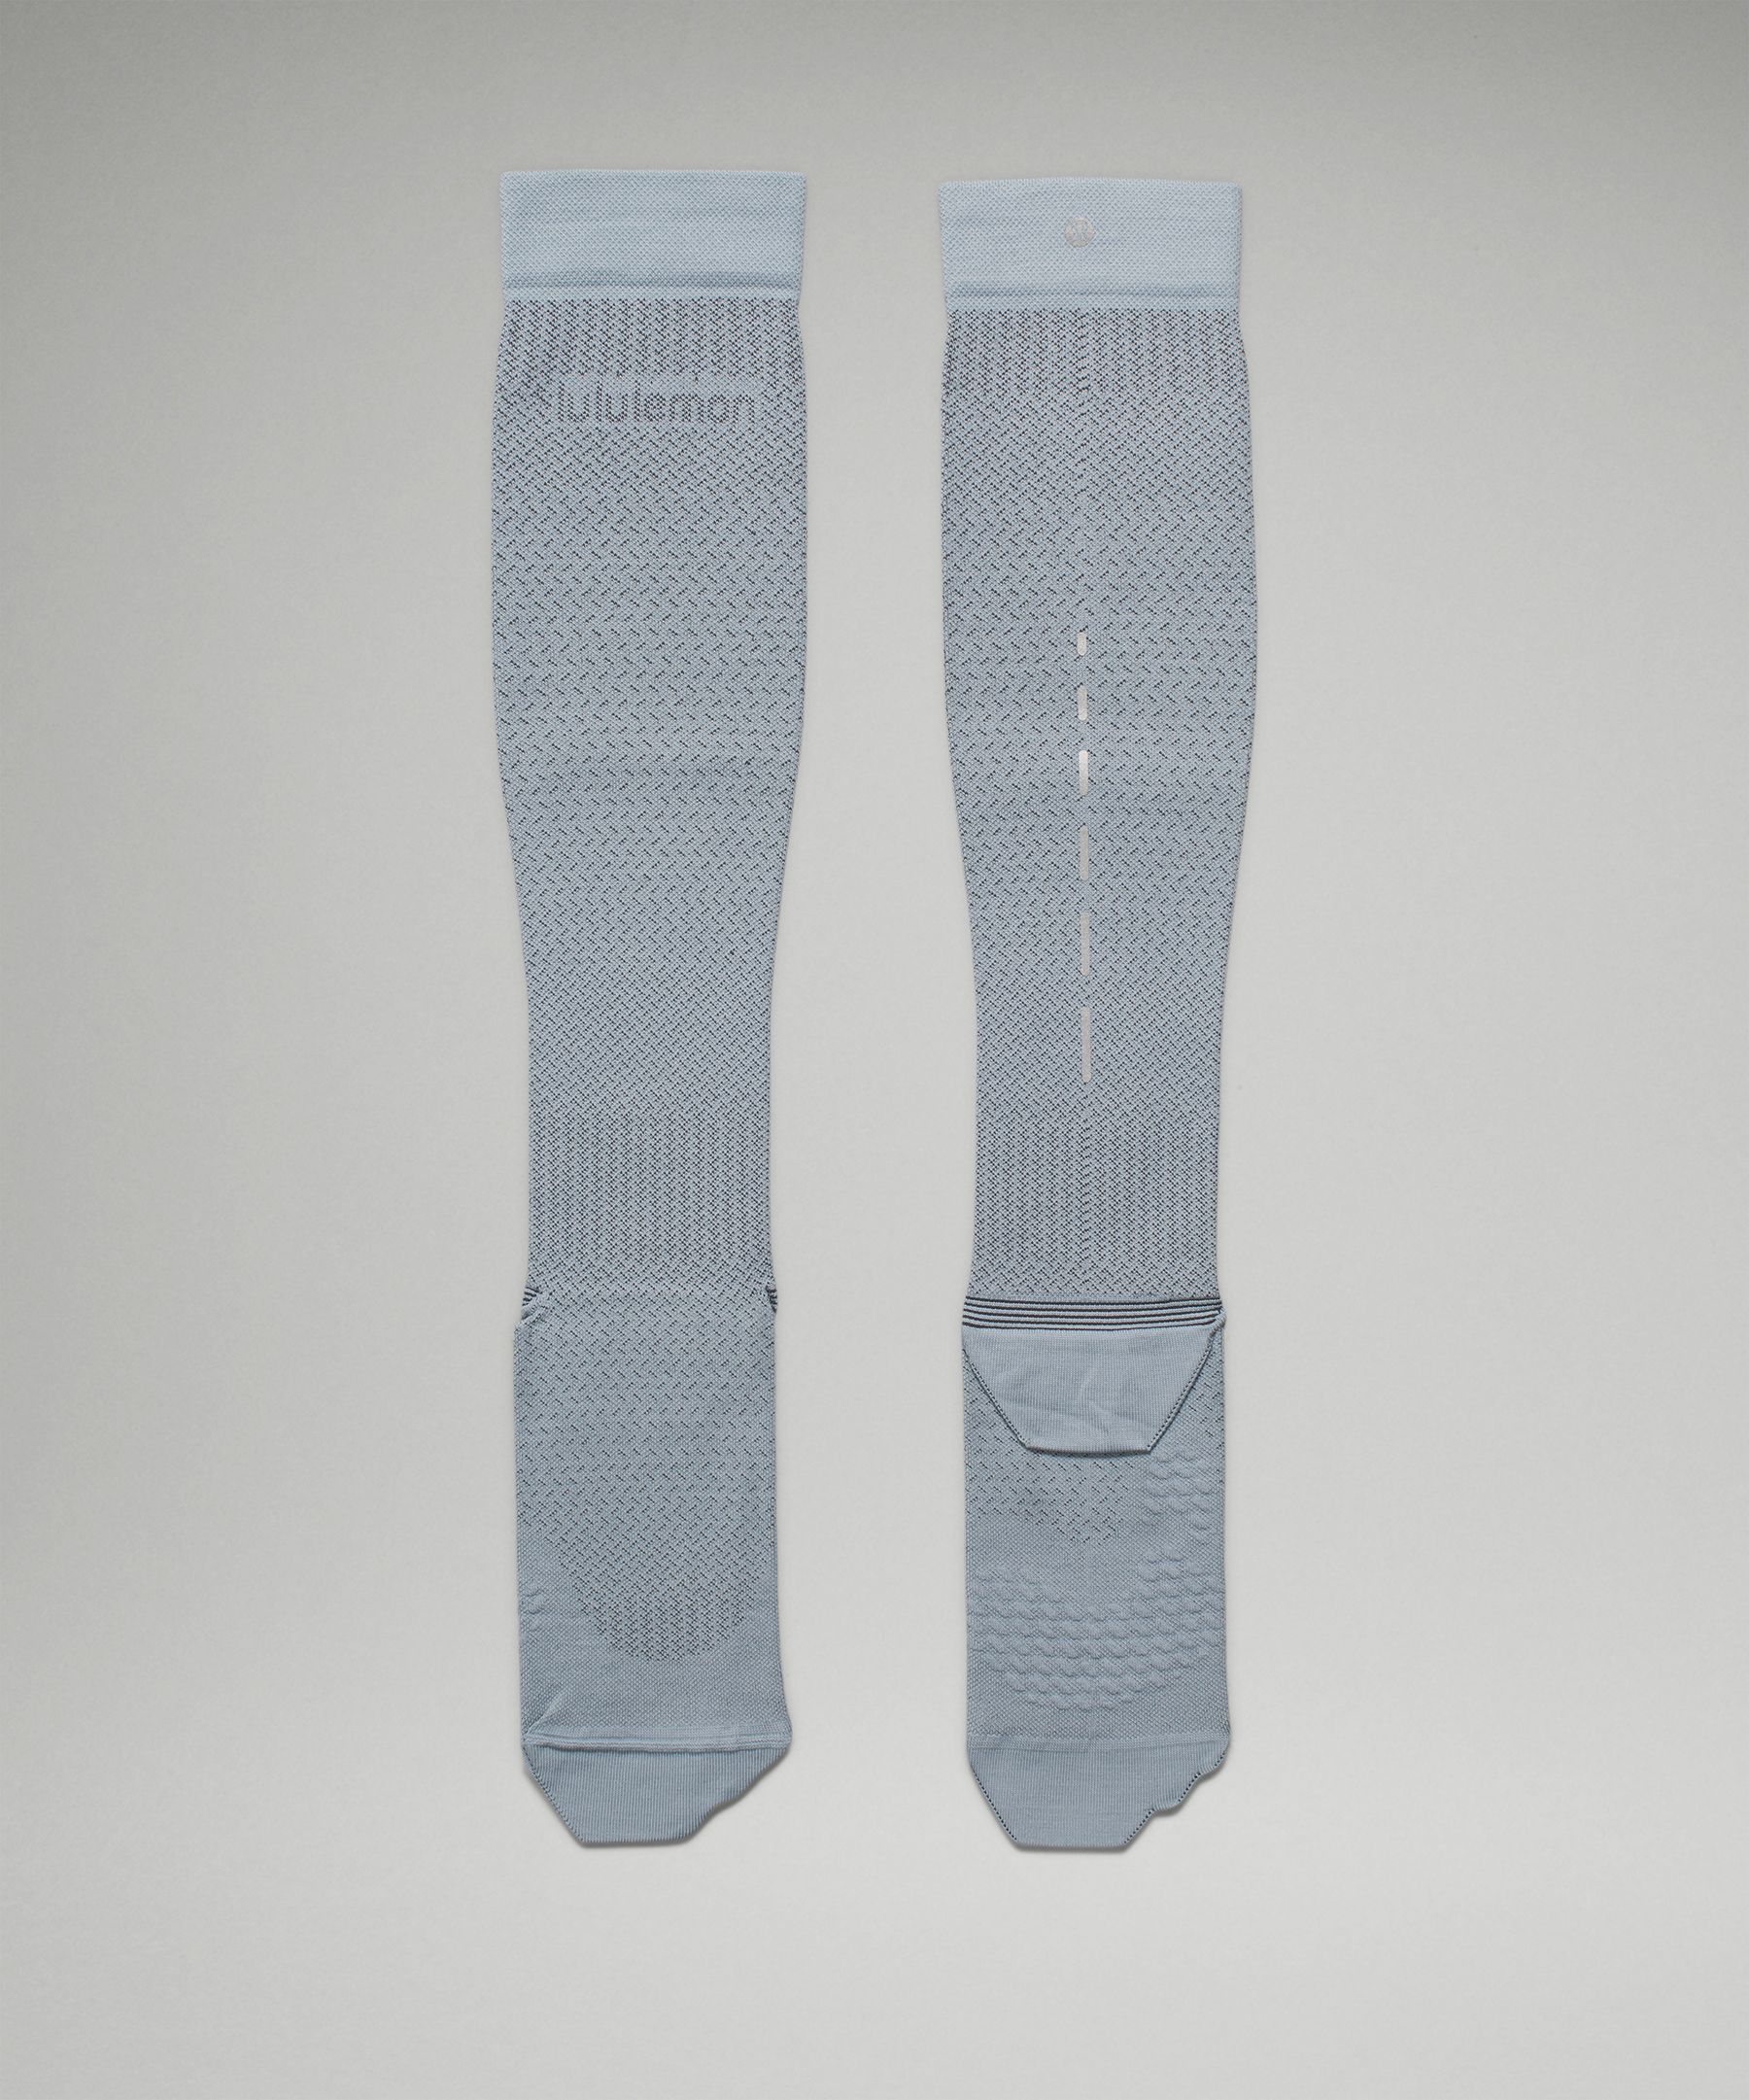 Lululemon Micropillow Compression Knee-high Running Socks Light Cushioning In Chambray